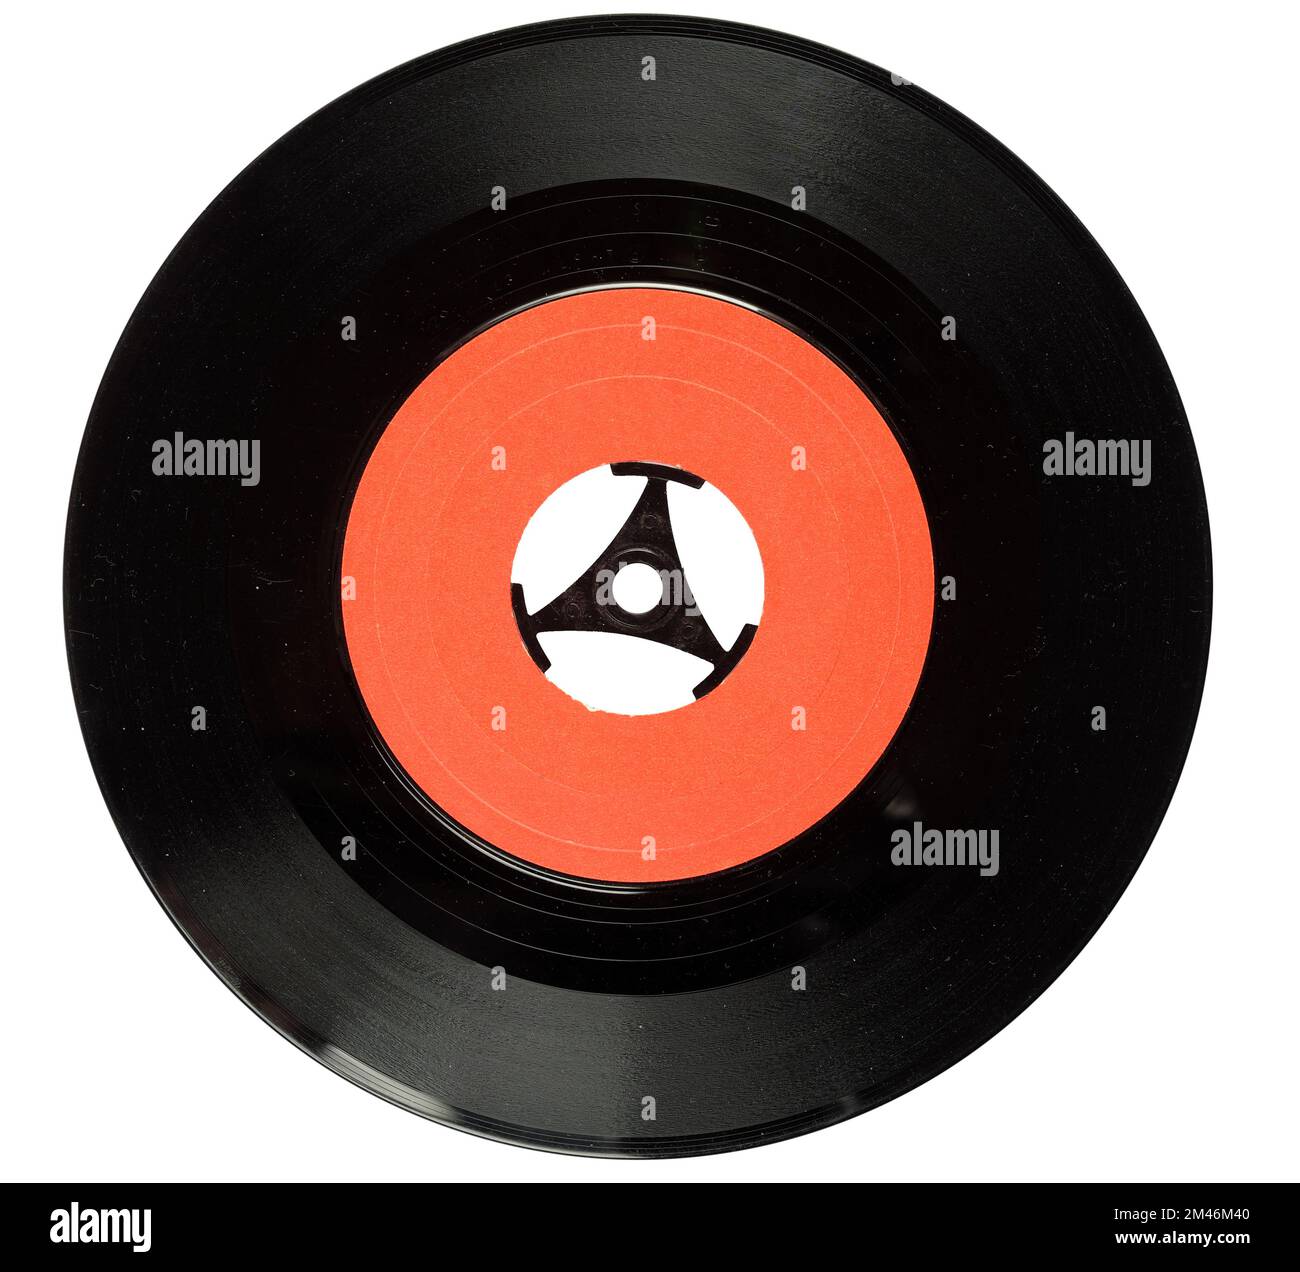 7 inch single Cut Out Stock Images & Pictures - Alamy